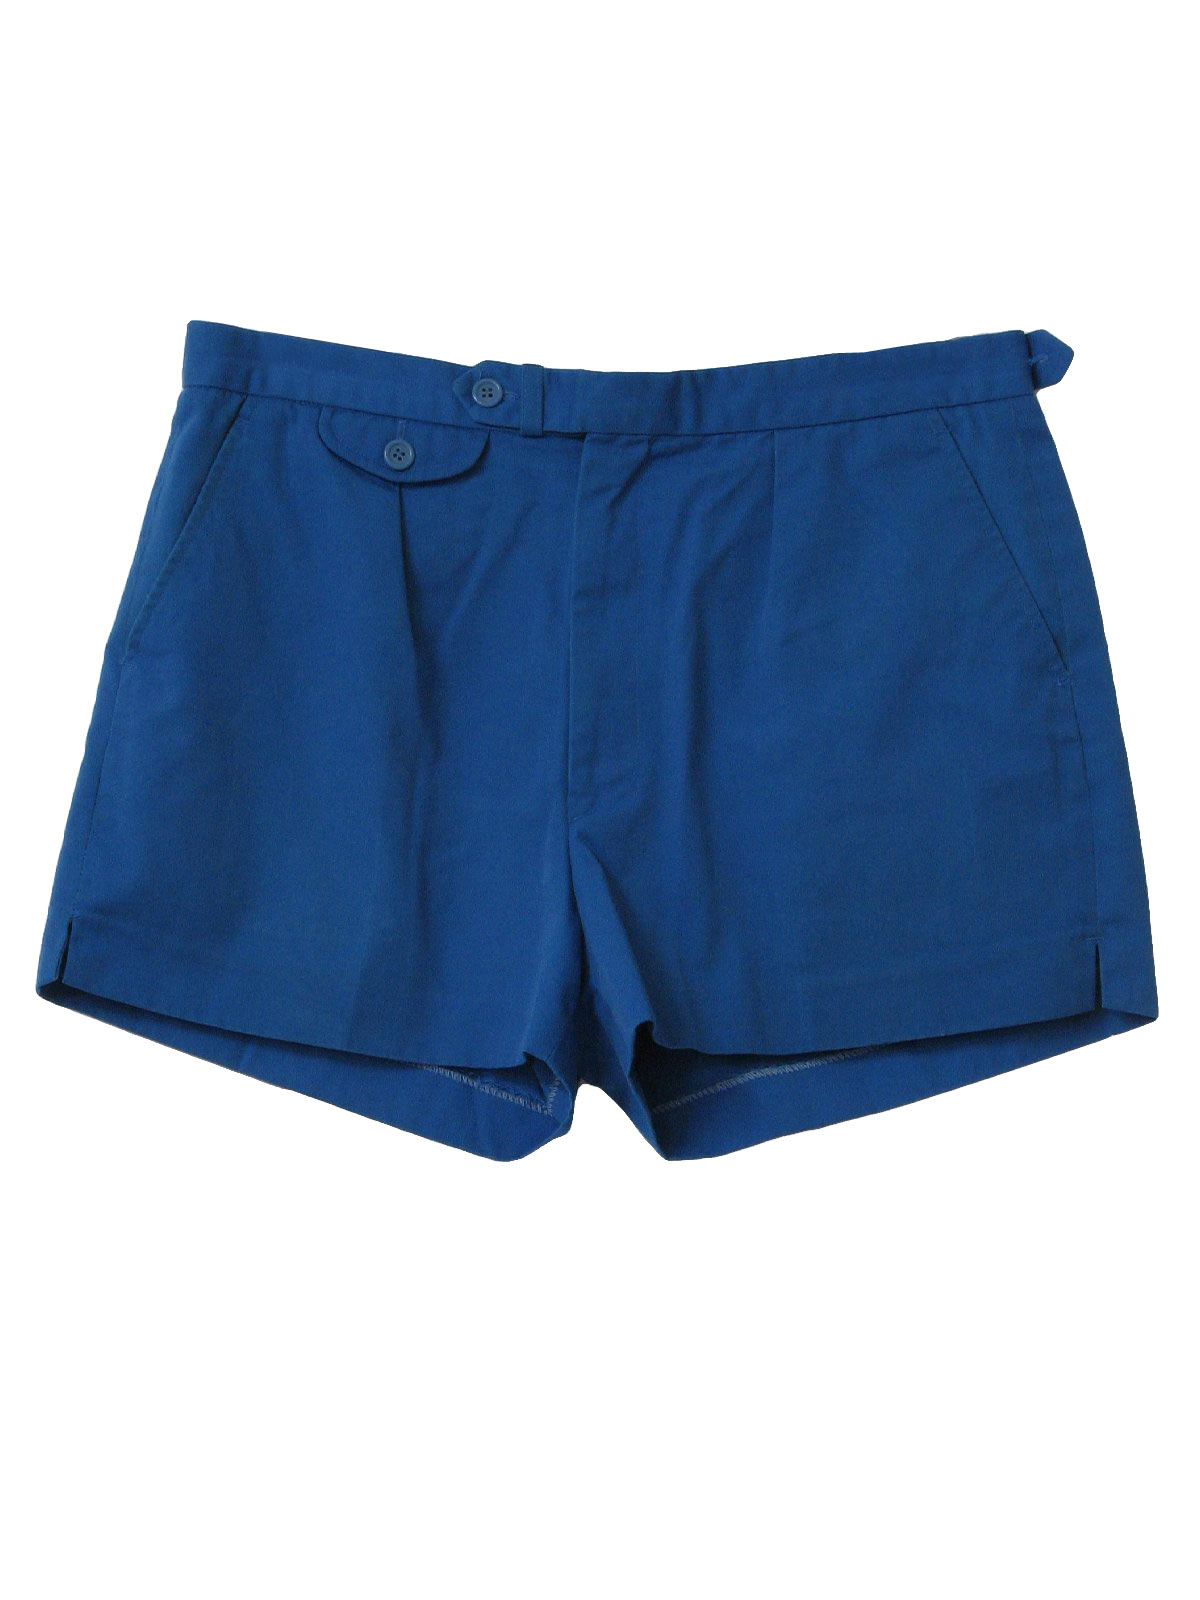 Retro Eighties Shorts: 80s -the Fox- Mens blue polyester and cotton ...